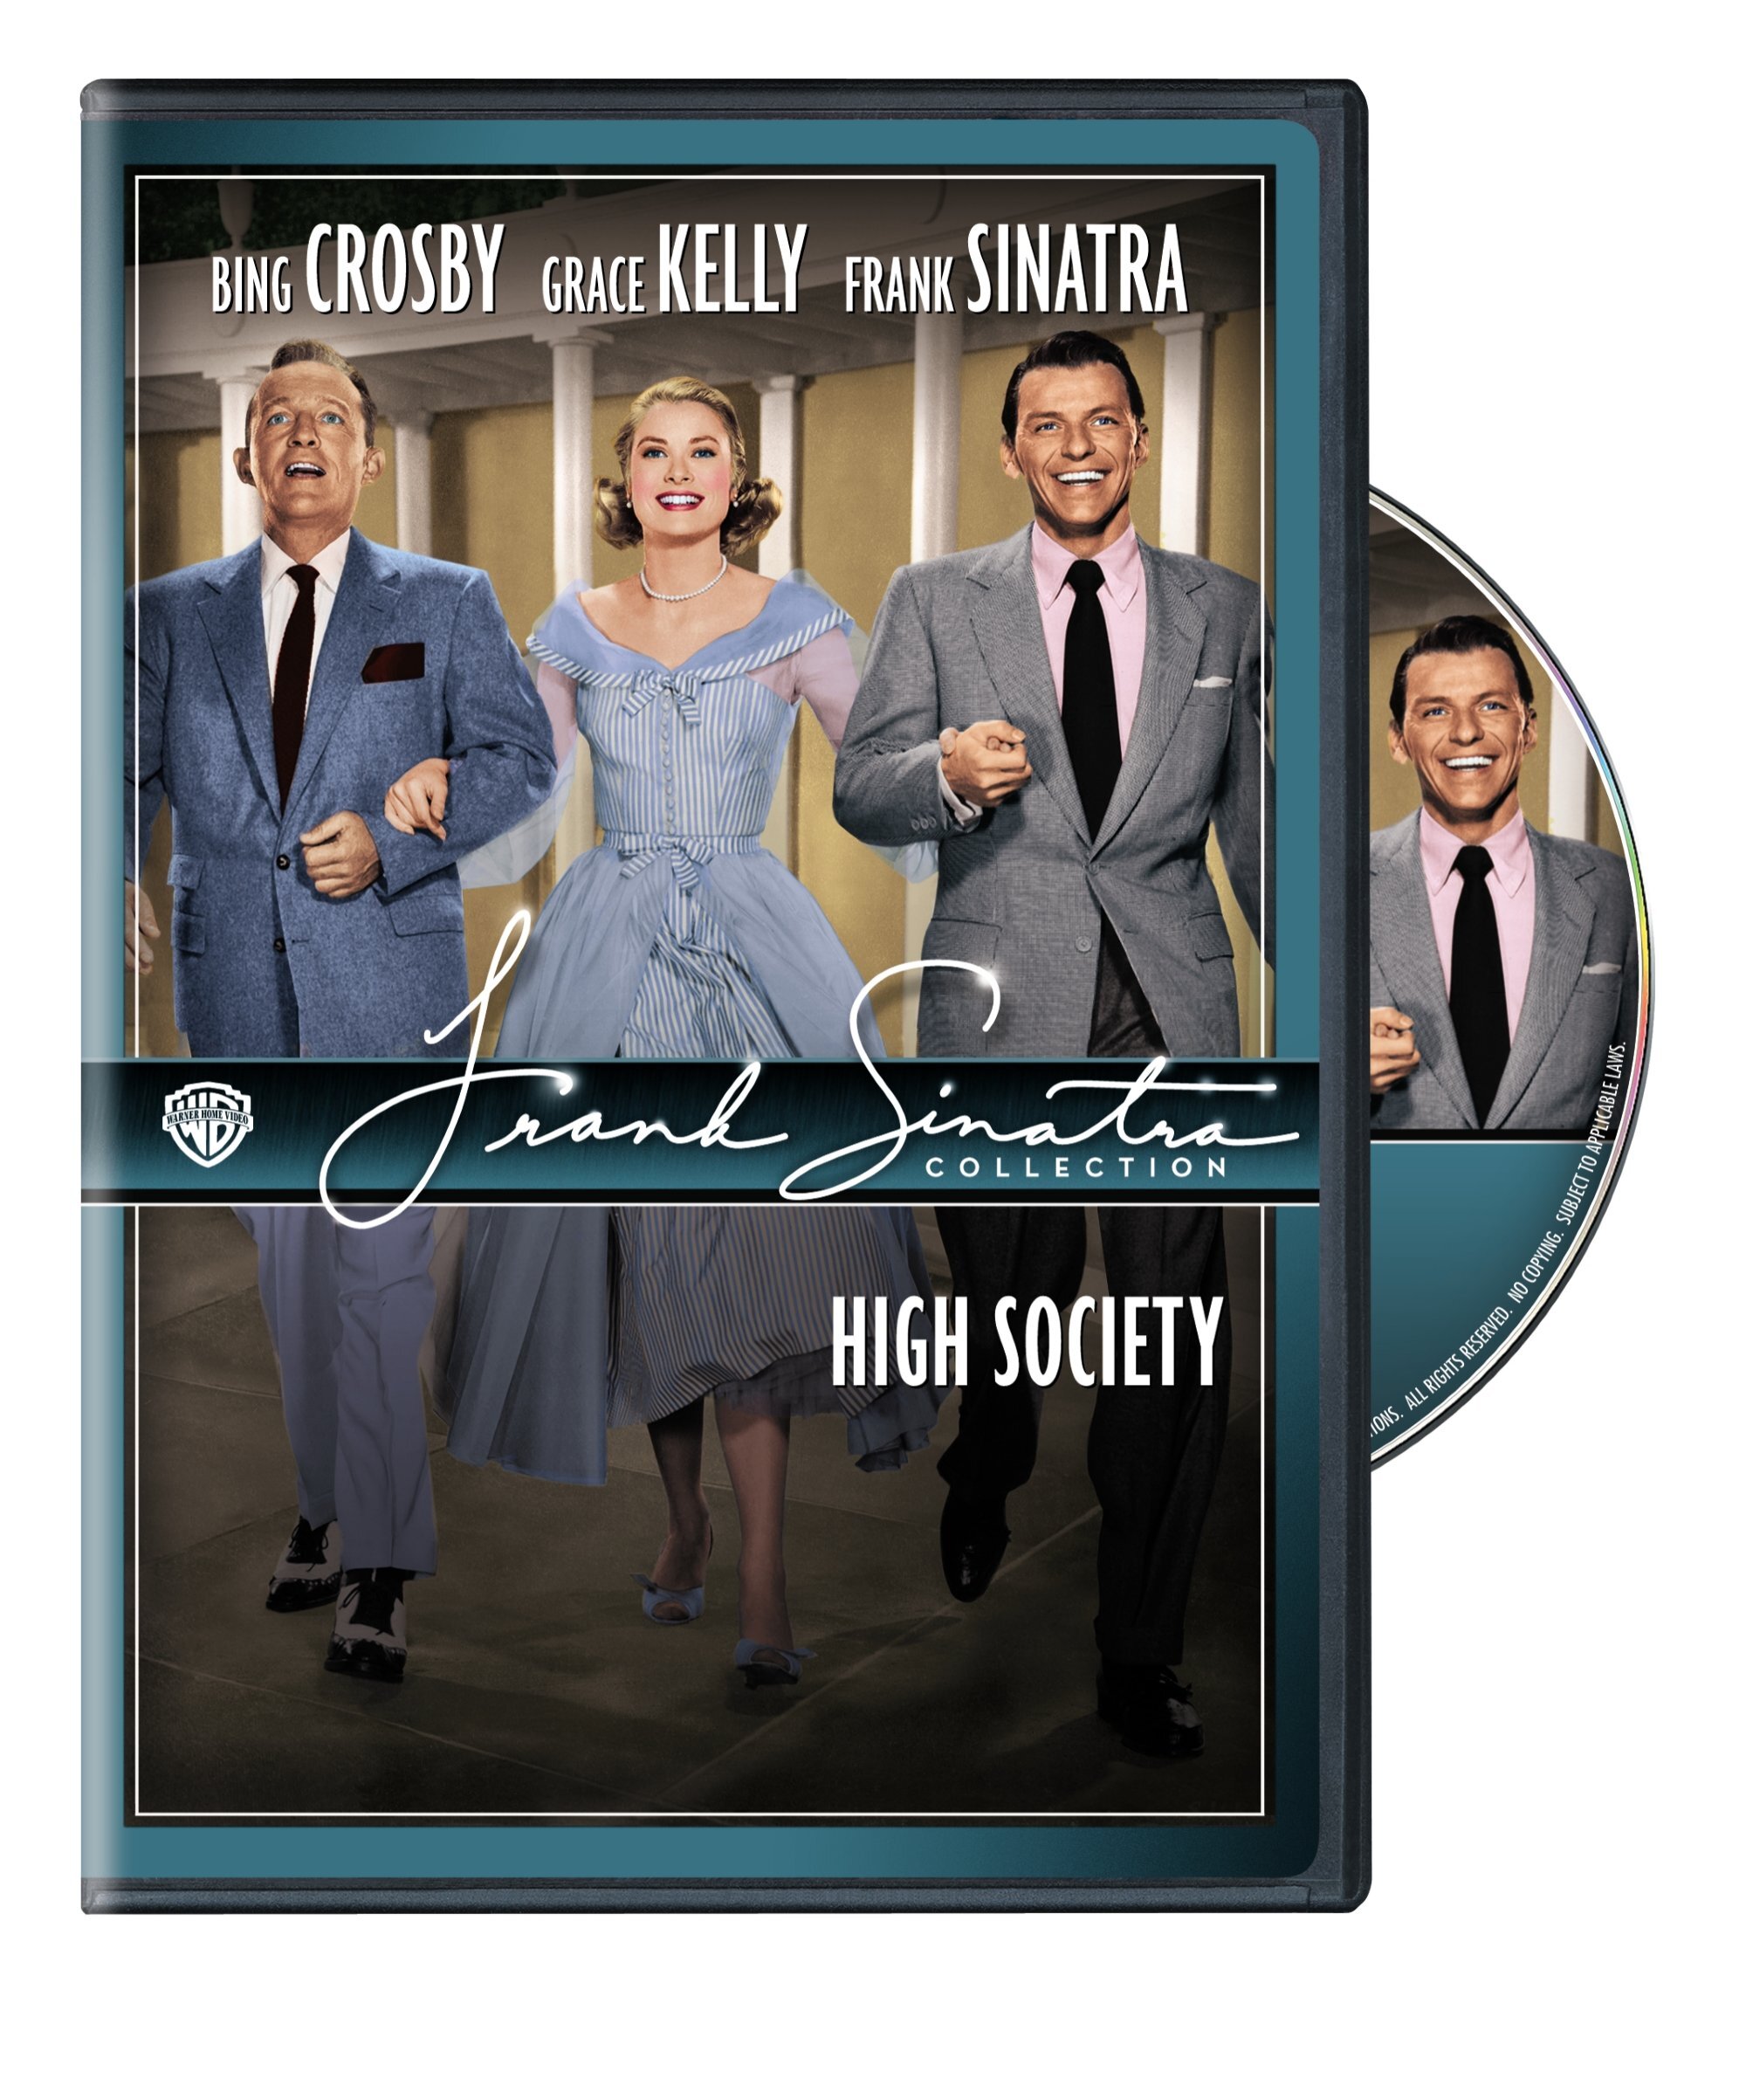 High Society (DVD Collector's Edition) - DVD [ 1956 ]  - Musical Movies On DVD - Movies On GRUV